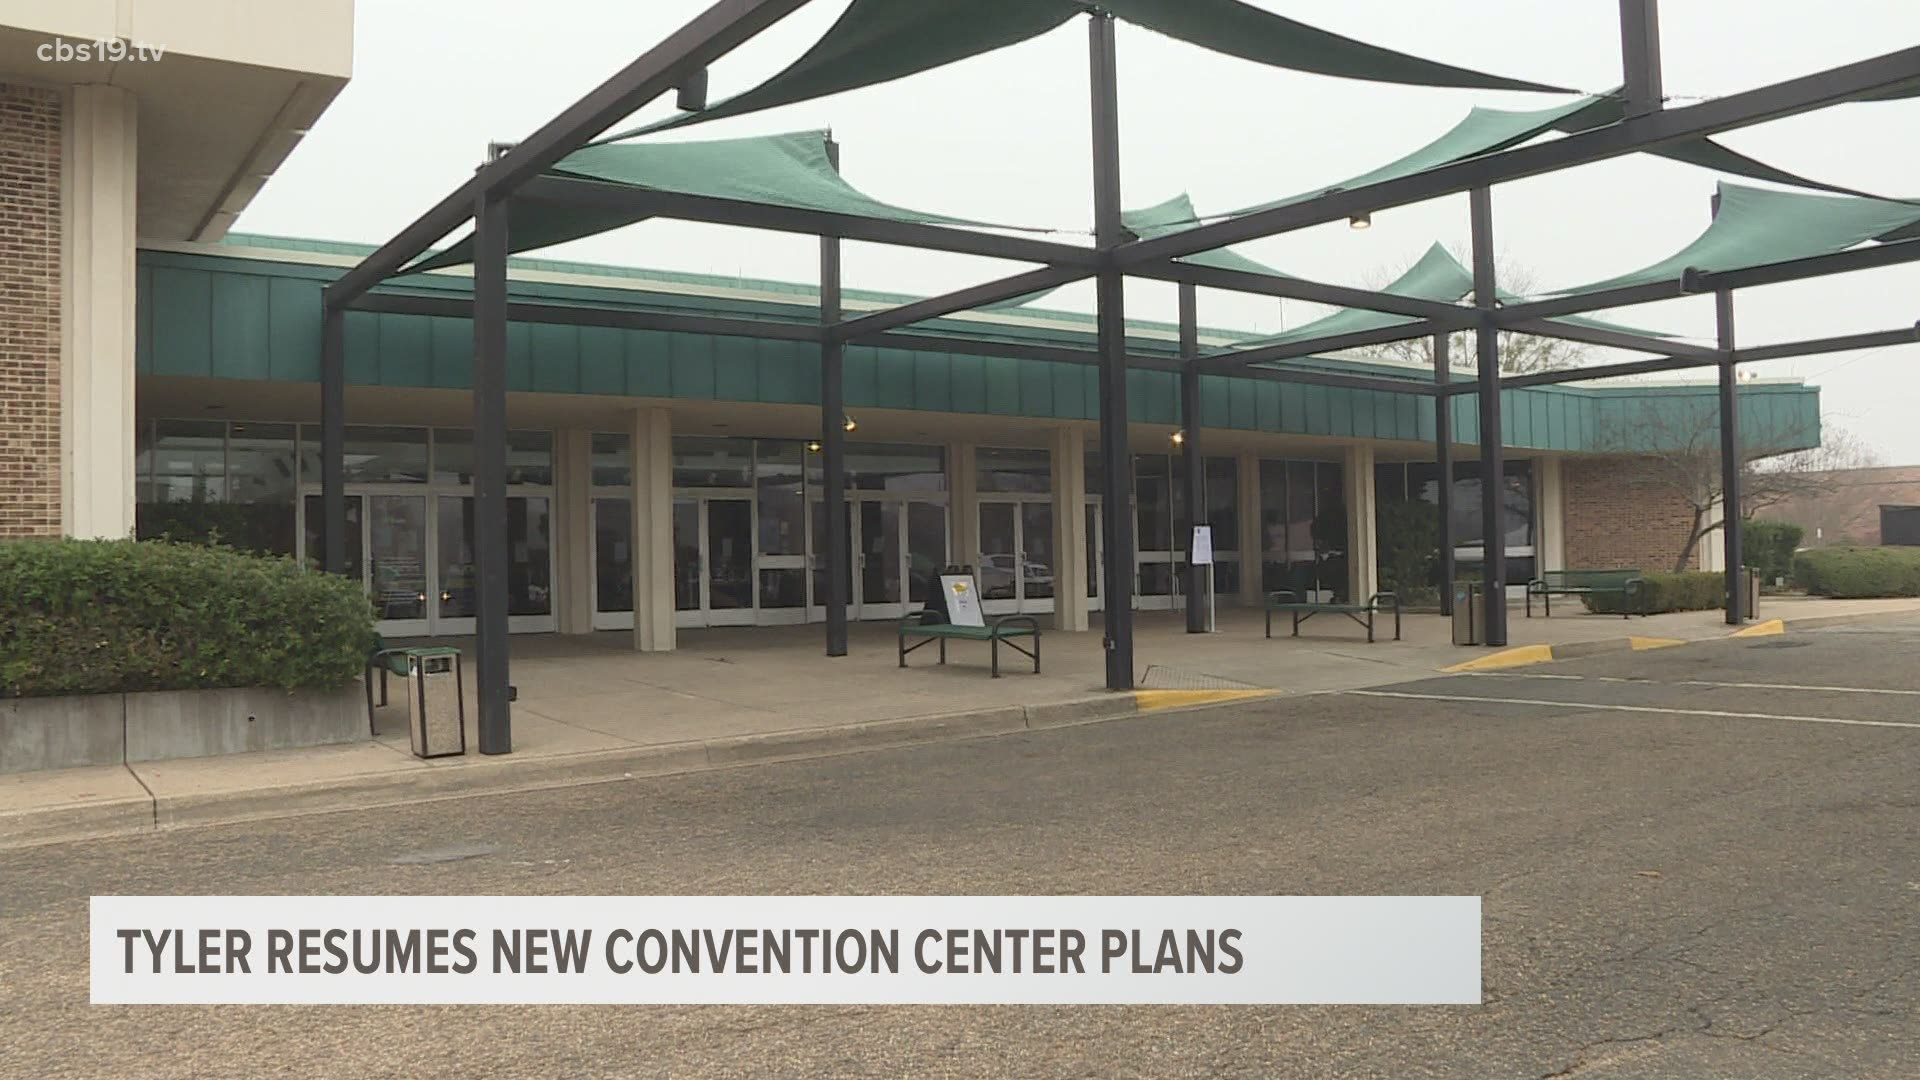 In 2019, the City of Tyler announced it would be building the Rose Complex Convention Center where Harvey Hall is currently located.